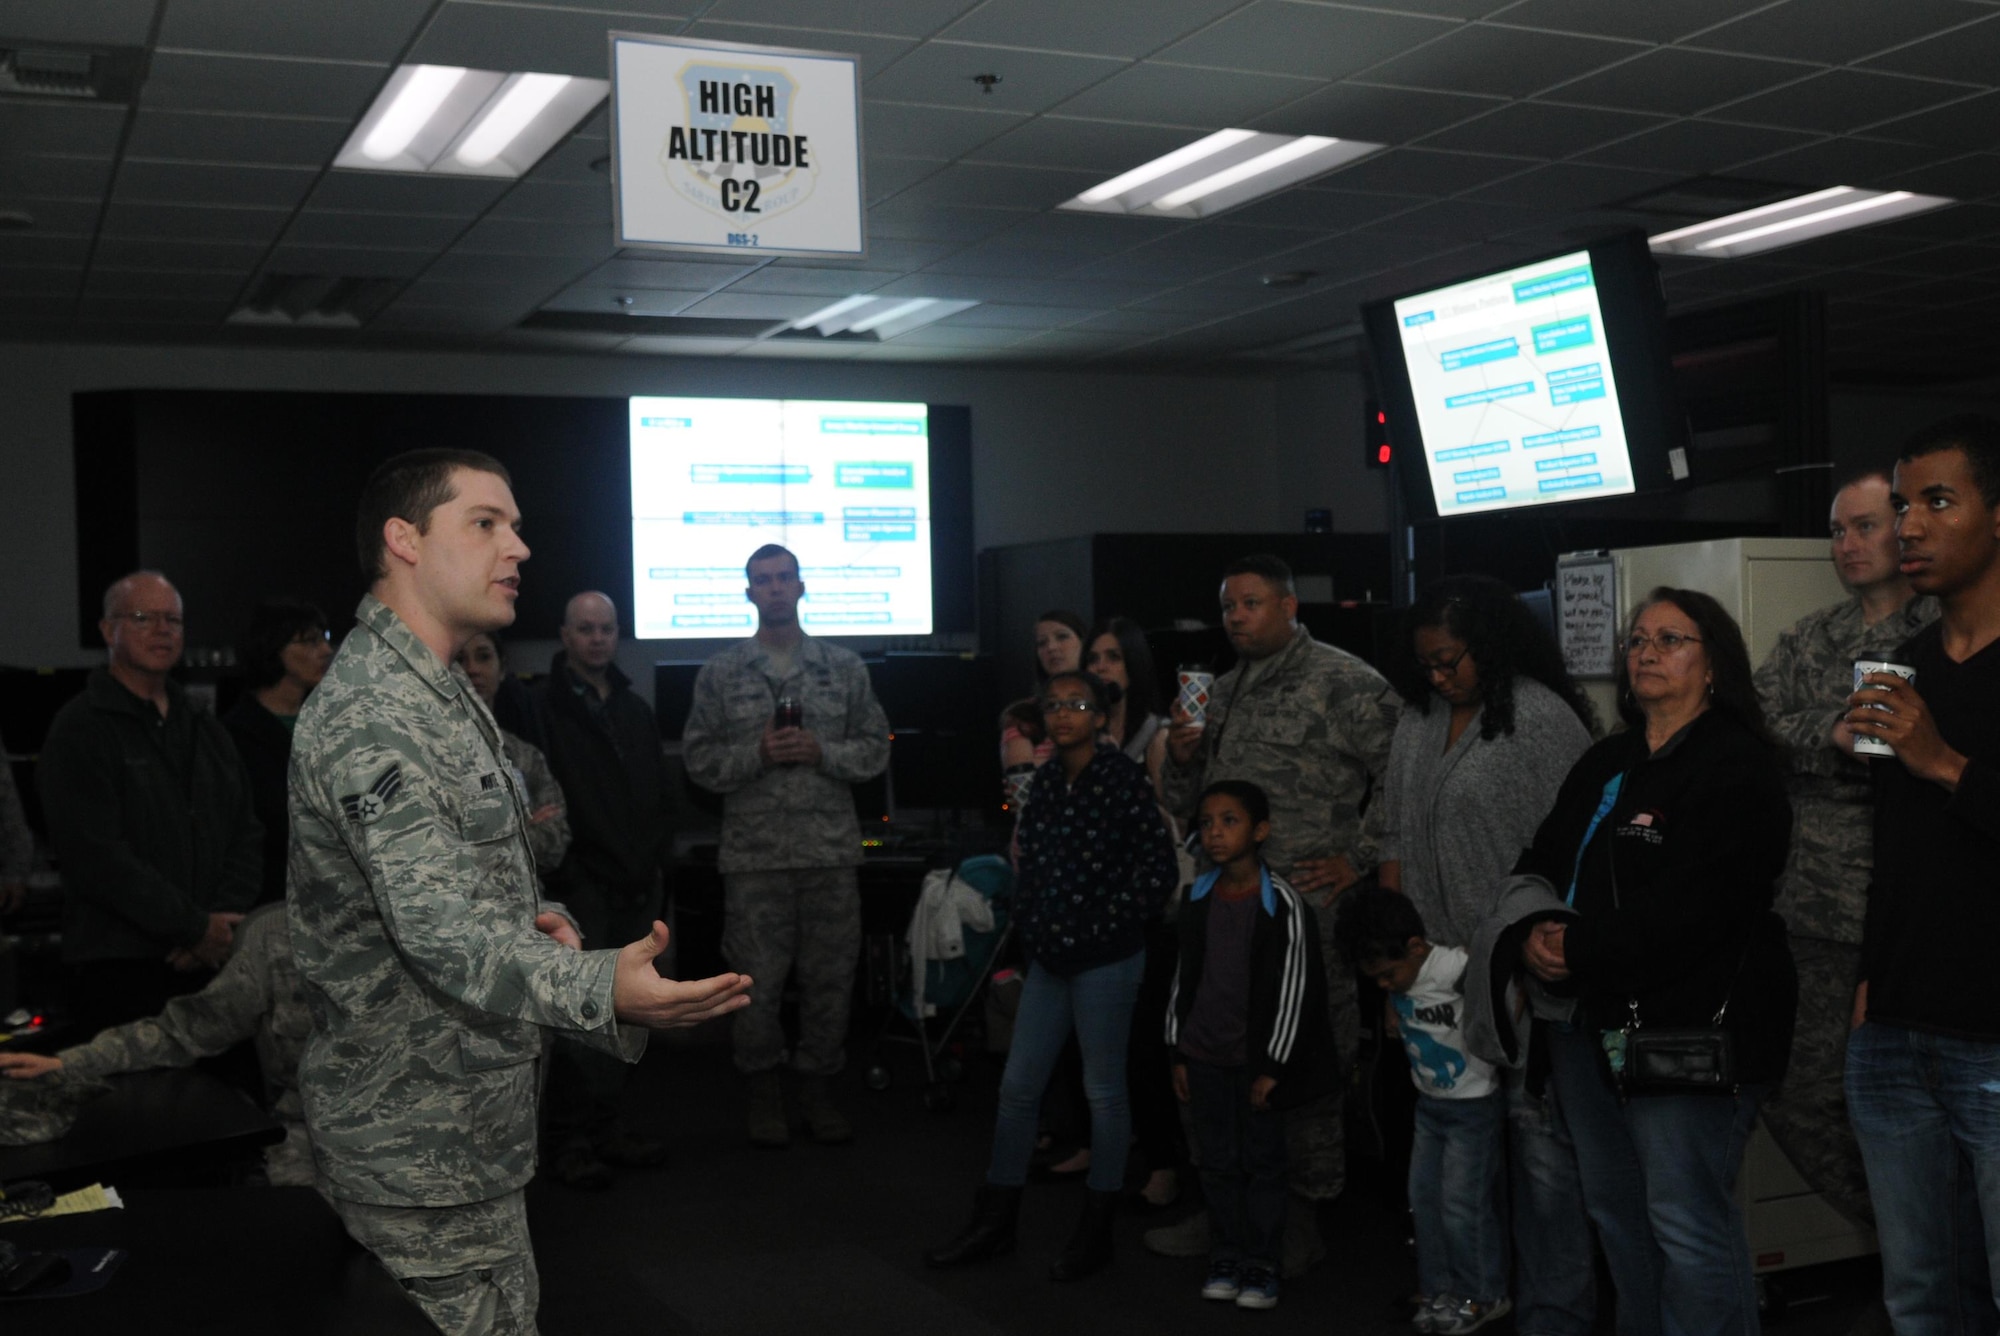 Senior Airman Christopher explains the importance if signals intelligence to Airmen and their families at an open house hosted by the 548th Intelligence, Surveillance and Reconnaissance Group at Beale Air Force Base on April 13, 2016. The 548th ISR Group opened their doors, allowing family members to get an inside look at the work their Airmen do on a daily basis. (U.S. Air Force photo by Airman 1st Class Jessica B. Nelson)